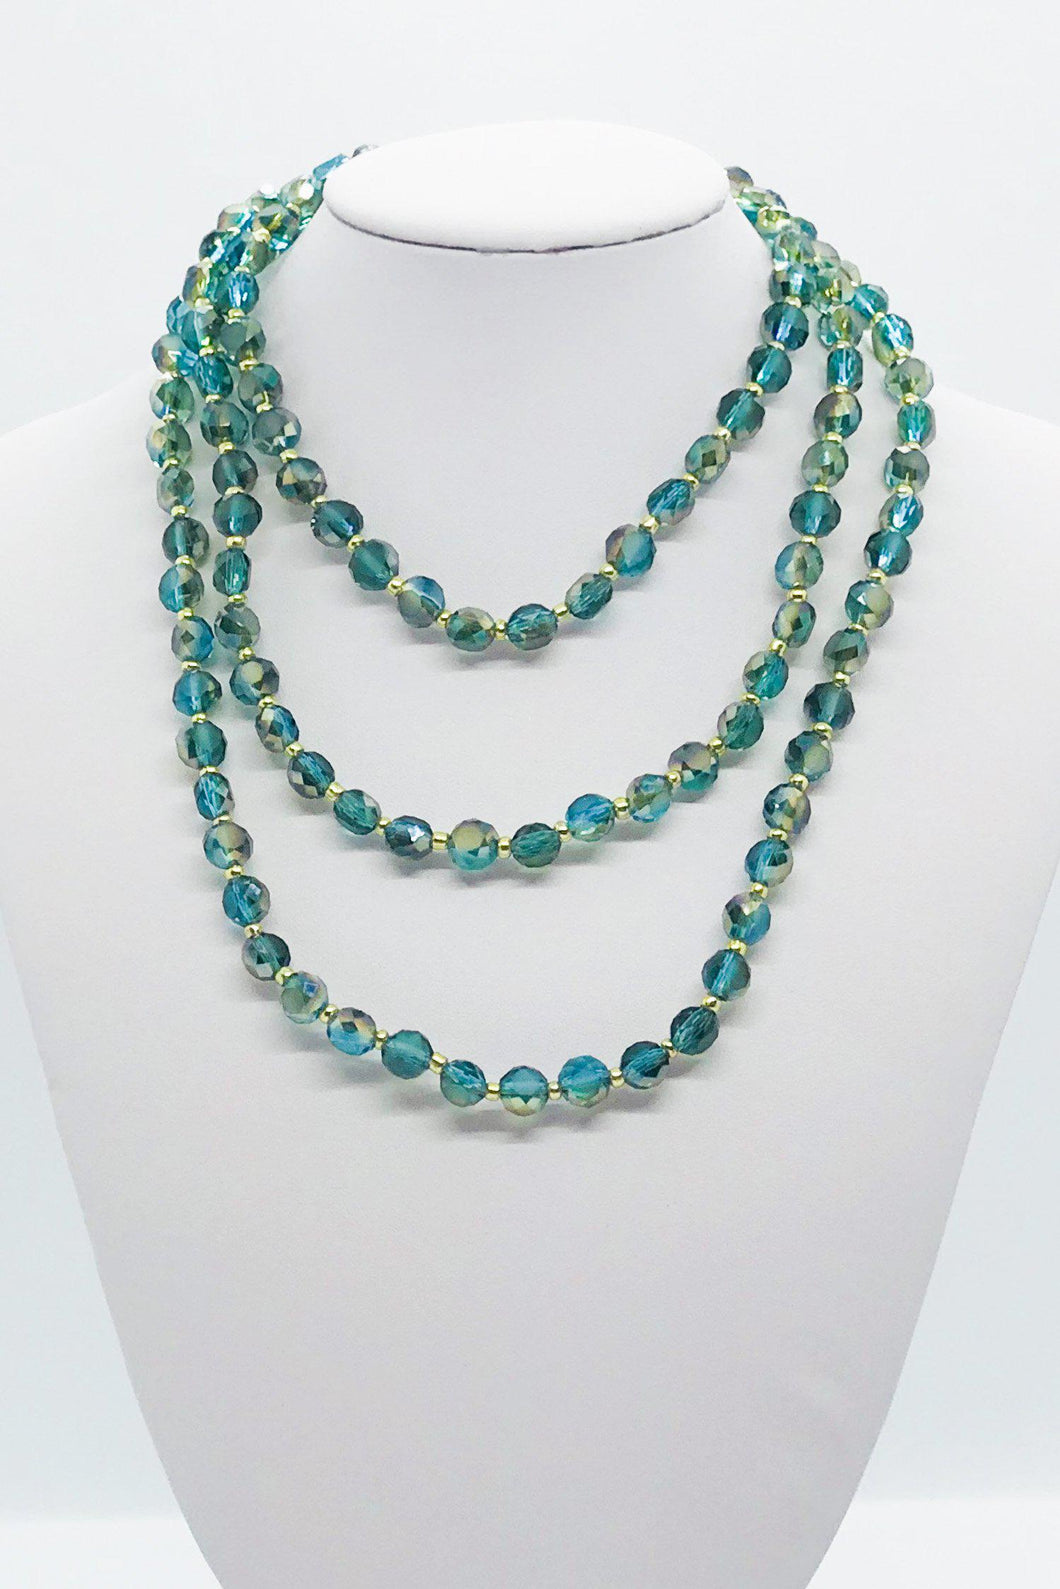 Blue/Green Glass Bead Necklace - N177